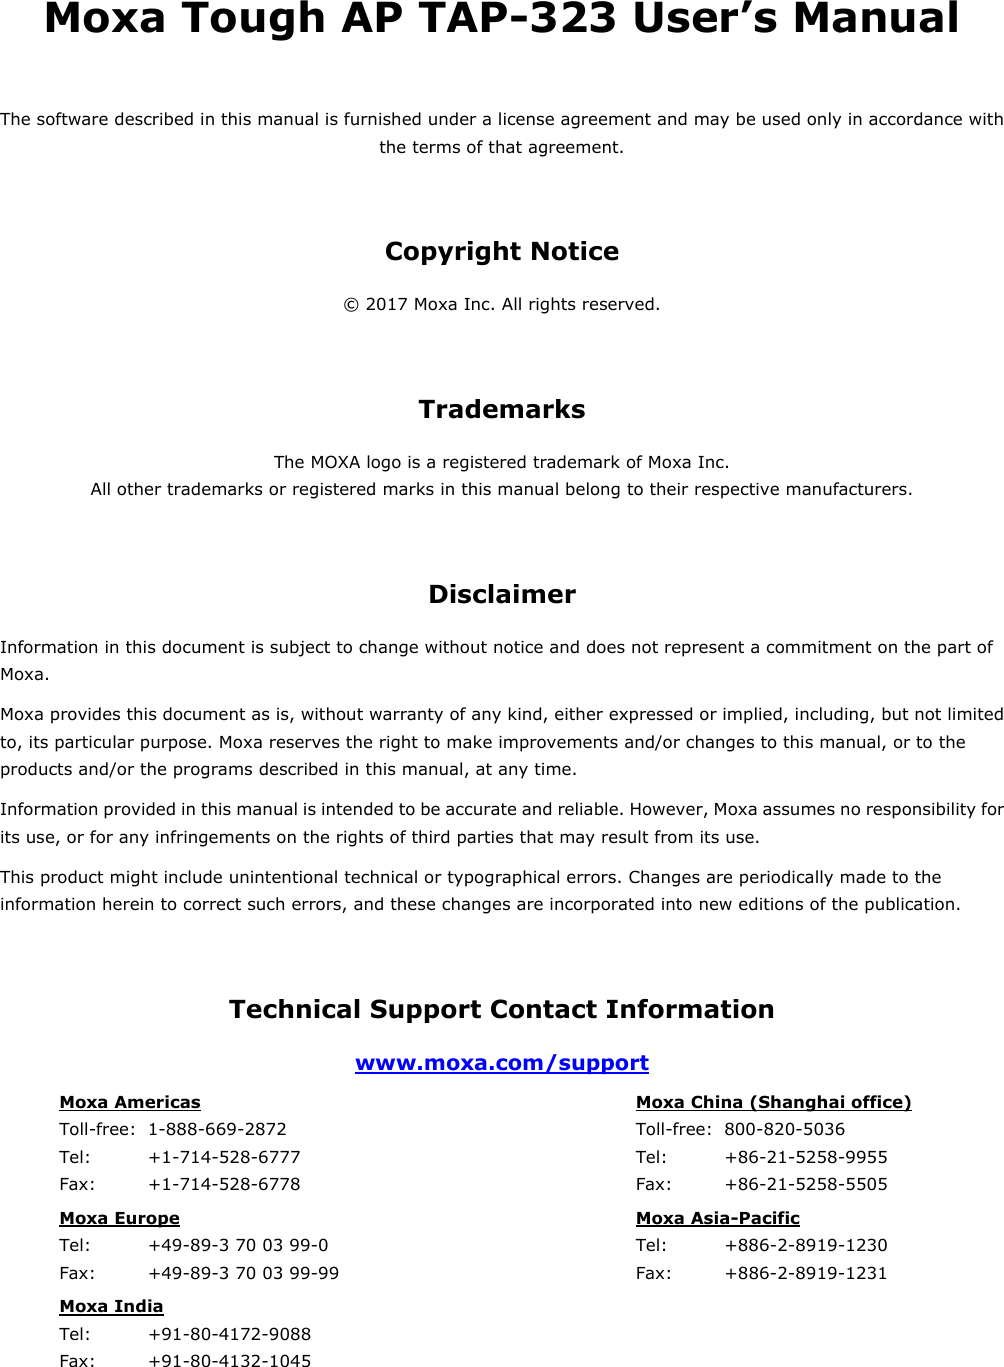 Moxa Tough AP TAP-323 User’s Manual The software described in this manual is furnished under a license agreement and may be used only in accordance with the terms of that agreement. Copyright Notice © 2017 Moxa Inc. All rights reserved. Trademarks The MOXA logo is a registered trademark of Moxa Inc. All other trademarks or registered marks in this manual belong to their respective manufacturers. Disclaimer Information in this document is subject to change without notice and does not represent a commitment on the part of Moxa. Moxa provides this document as is, without warranty of any kind, either expressed or implied, including, but not limited to, its particular purpose. Moxa reserves the right to make improvements and/or changes to this manual, or to the products and/or the programs described in this manual, at any time. Information provided in this manual is intended to be accurate and reliable. However, Moxa assumes no responsibility for its use, or for any infringements on the rights of third parties that may result from its use. This product might include unintentional technical or typographical errors. Changes are periodically made to the information herein to correct such errors, and these changes are incorporated into new editions of the publication. Technical Support Contact Information www.moxa.com/support Moxa Americas   Toll-free:  1-888-669-2872 Tel:    +1-714-528-6777 Fax:   +1-714-528-6778  Moxa China (Shanghai office)   Toll-free: 800-820-5036 Tel:    +86-21-5258-9955 Fax:   +86-21-5258-5505 Moxa Europe   Tel:    +49-89-3 70 03 99-0 Fax:   +49-89-3 70 03 99-99  Moxa Asia-Pacific   Tel:    +886-2-8919-1230 Fax:   +886-2-8919-1231 Moxa India   Tel:    +91-80-4172-9088 Fax:   +91-80-4132-1045        